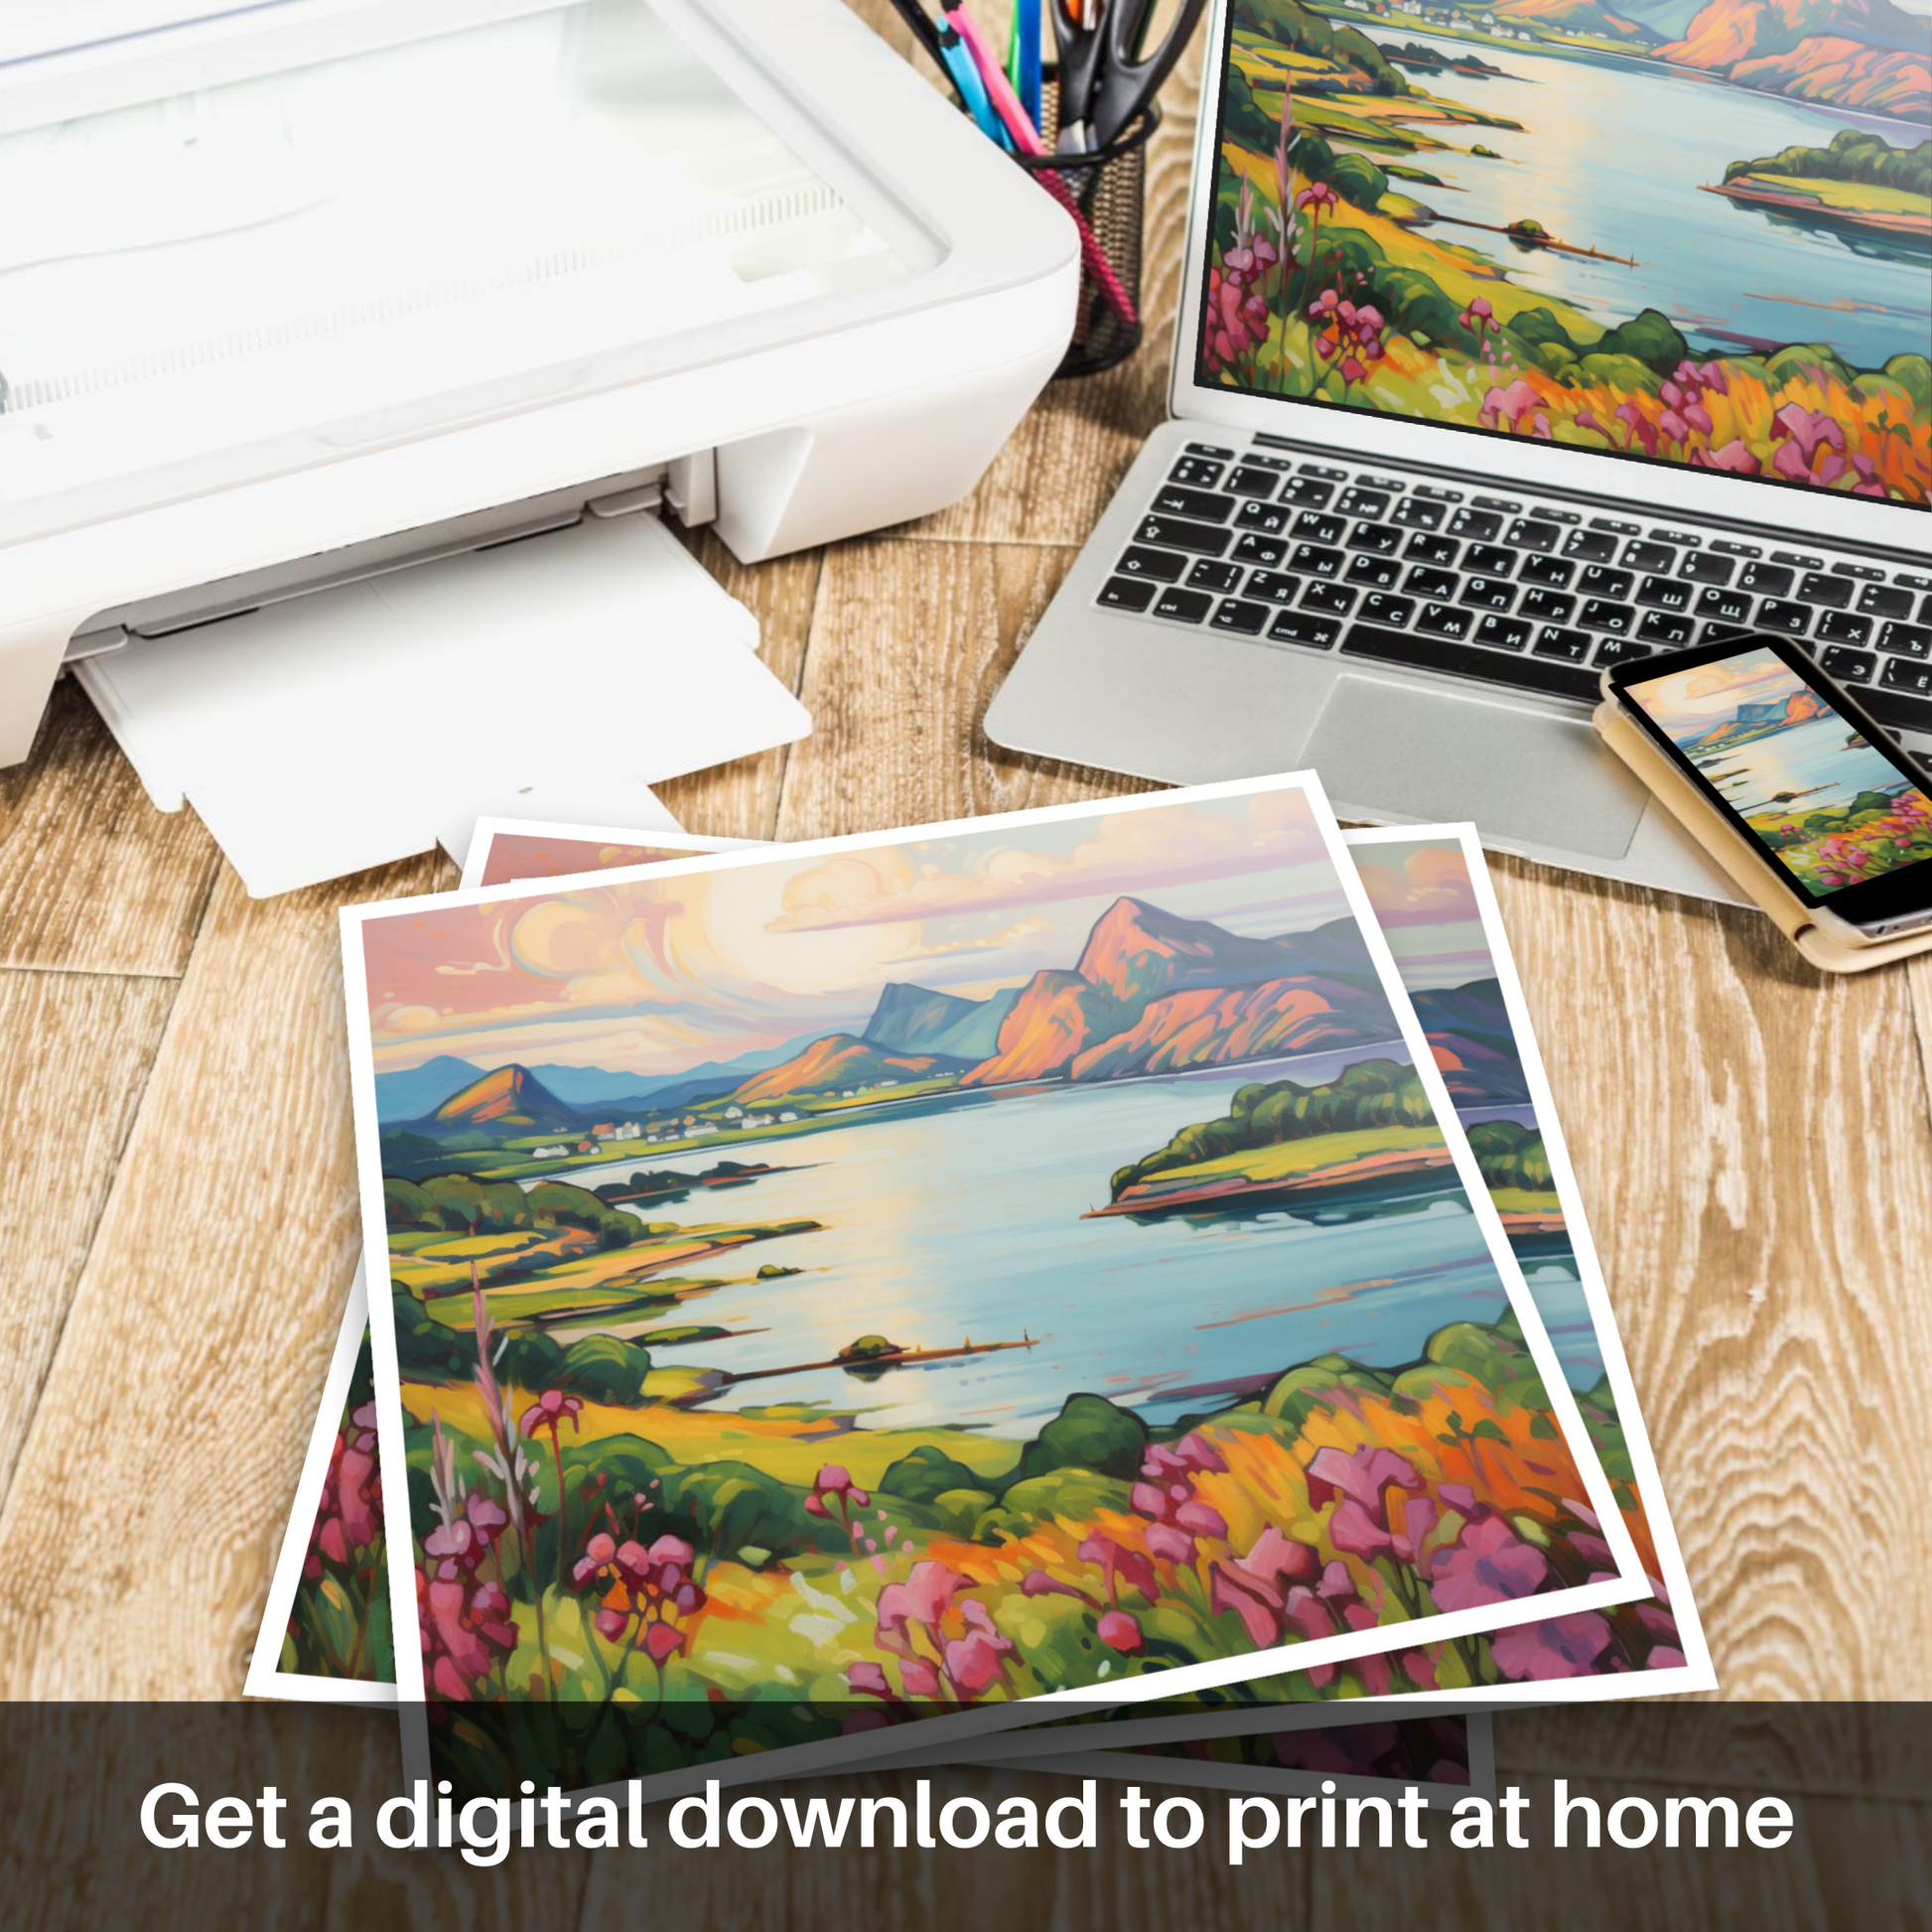 Downloadable and printable picture of Loch Leven, Highlands in summer